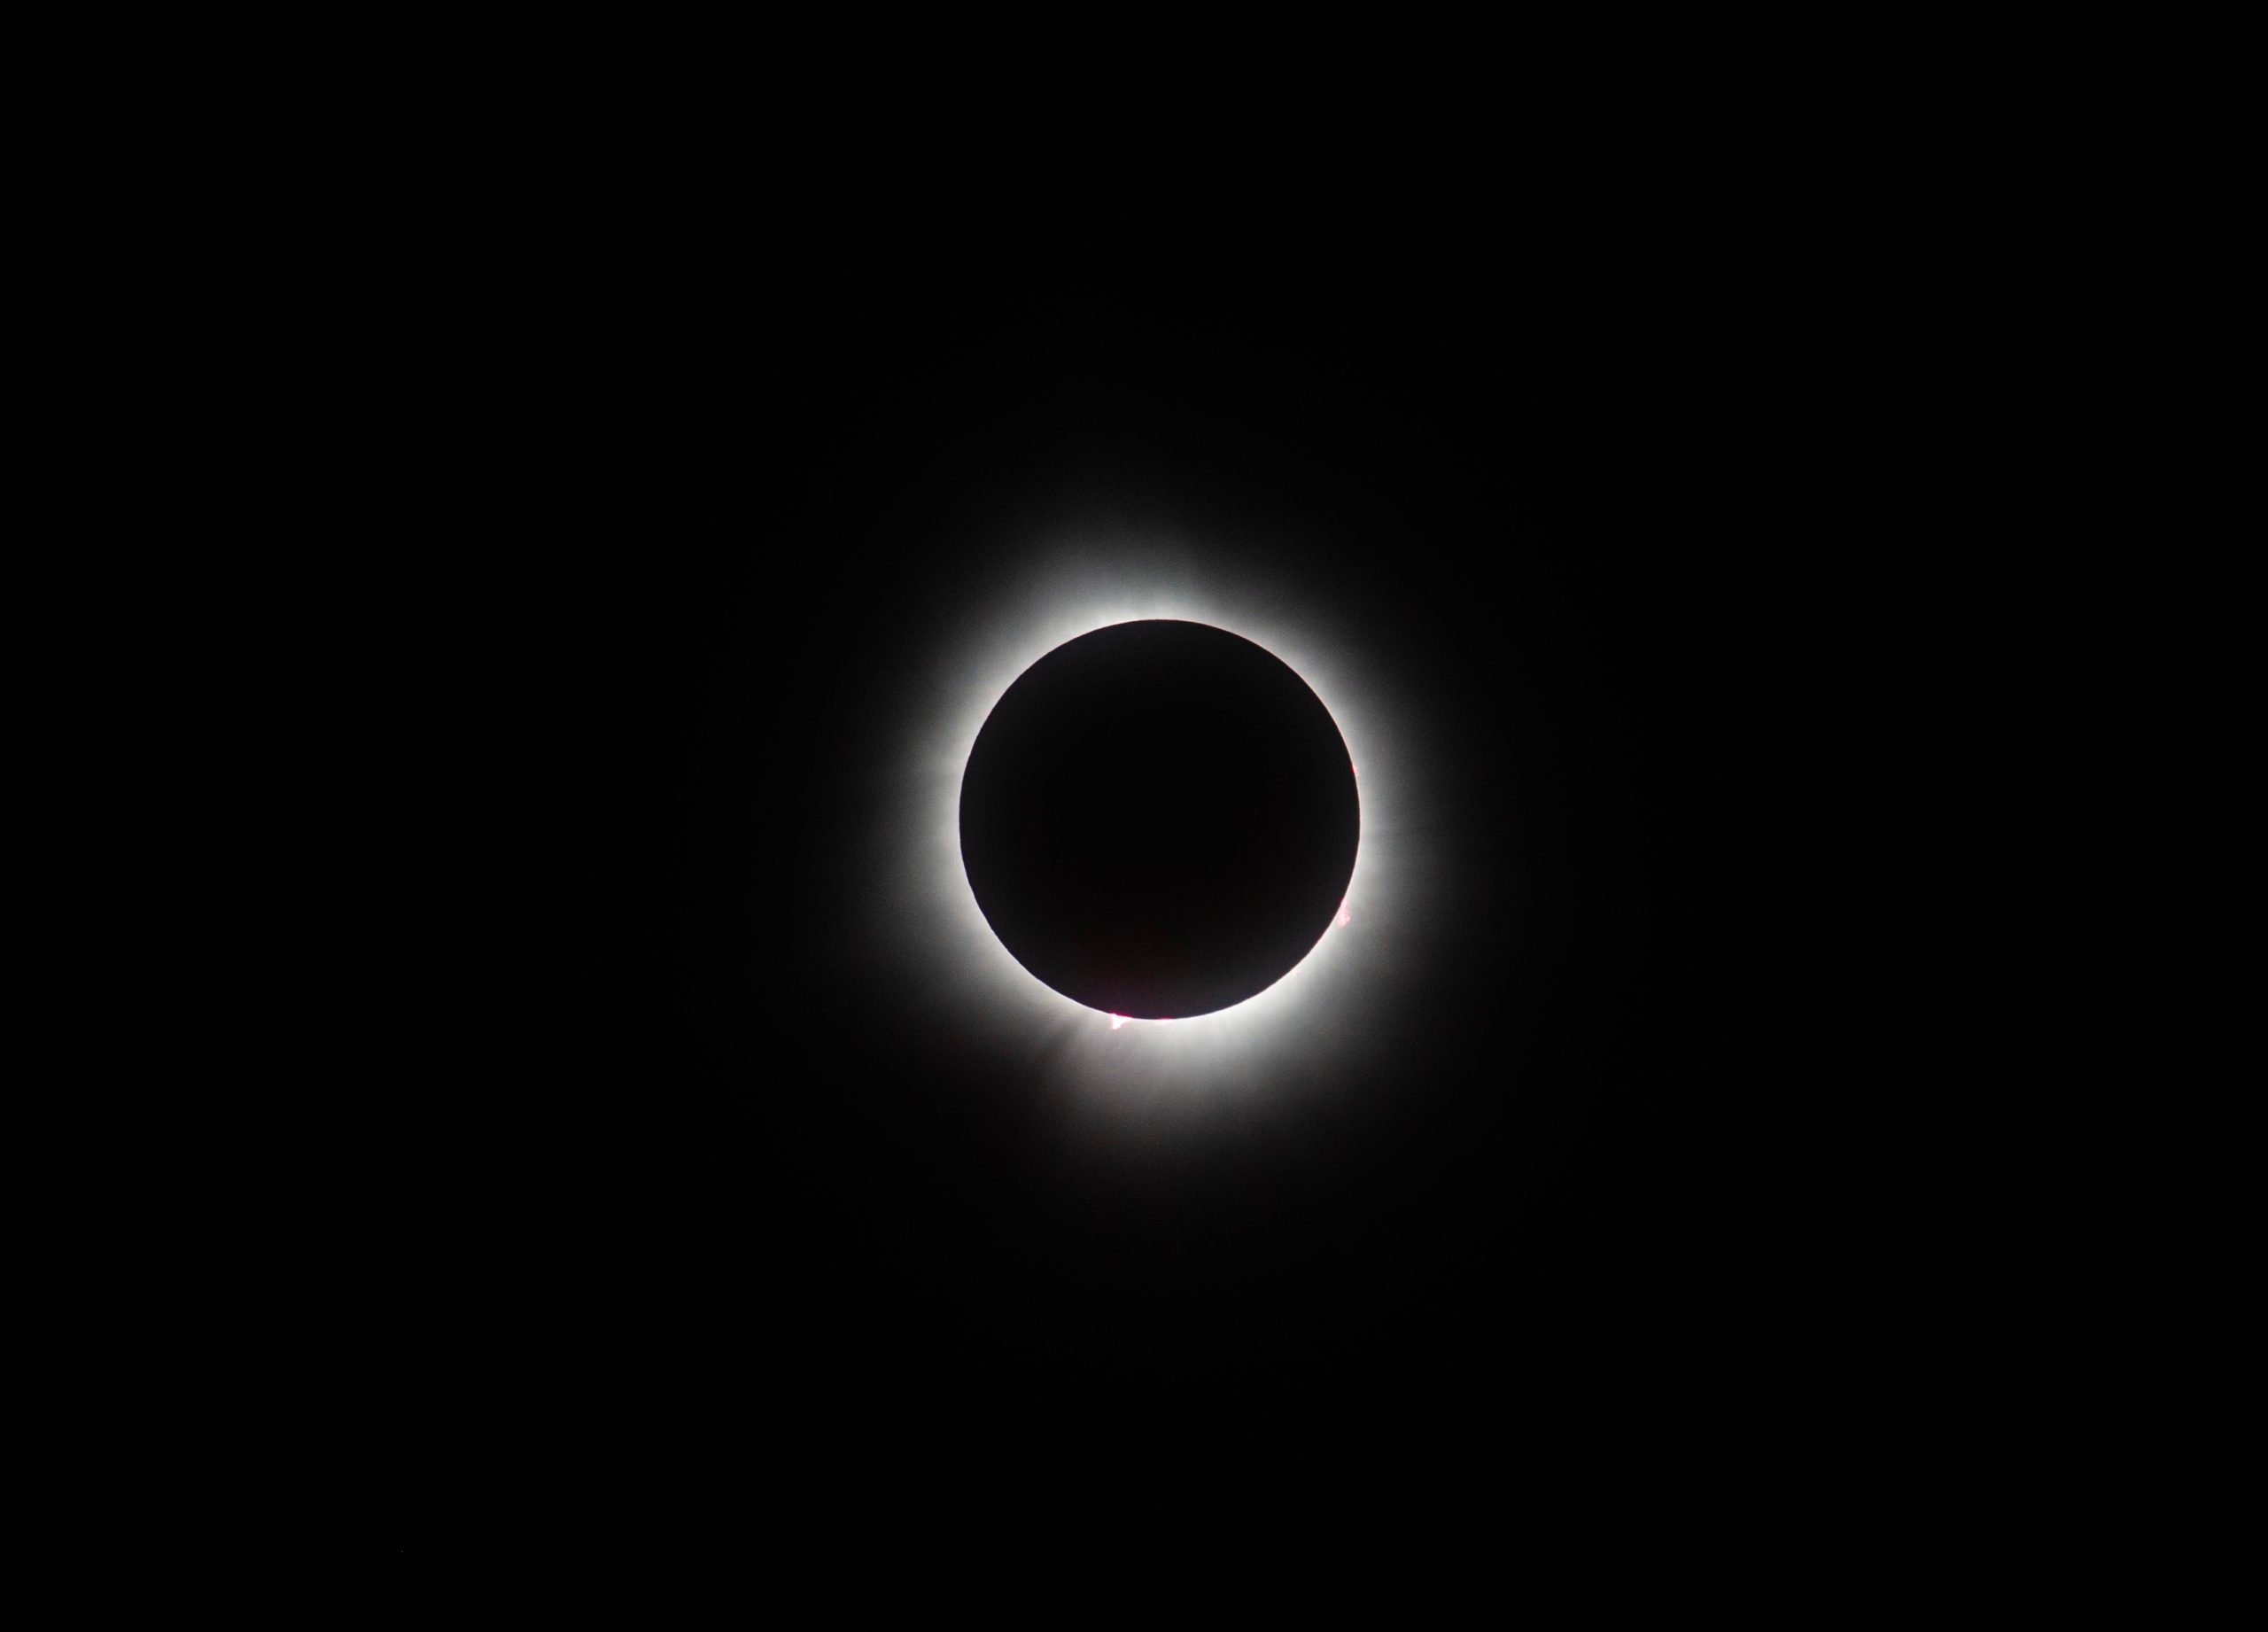 WAPAKONETA, OHIO - APRIL 8: The sun and the moon align completely, with solar prominences visible, during the total solar eclipse on April 8, 2024 in Wapakoneta, Ohio. Totality lasted for alomst four minutes in Ohio. Millions of people have flocked to areas across North America that are in the "path of totality" in order to experience a total solar eclipse. During the event, the moon will pass in between the sun and the Earth, appearing to block the sun. Matthew Hatcher/Getty Images